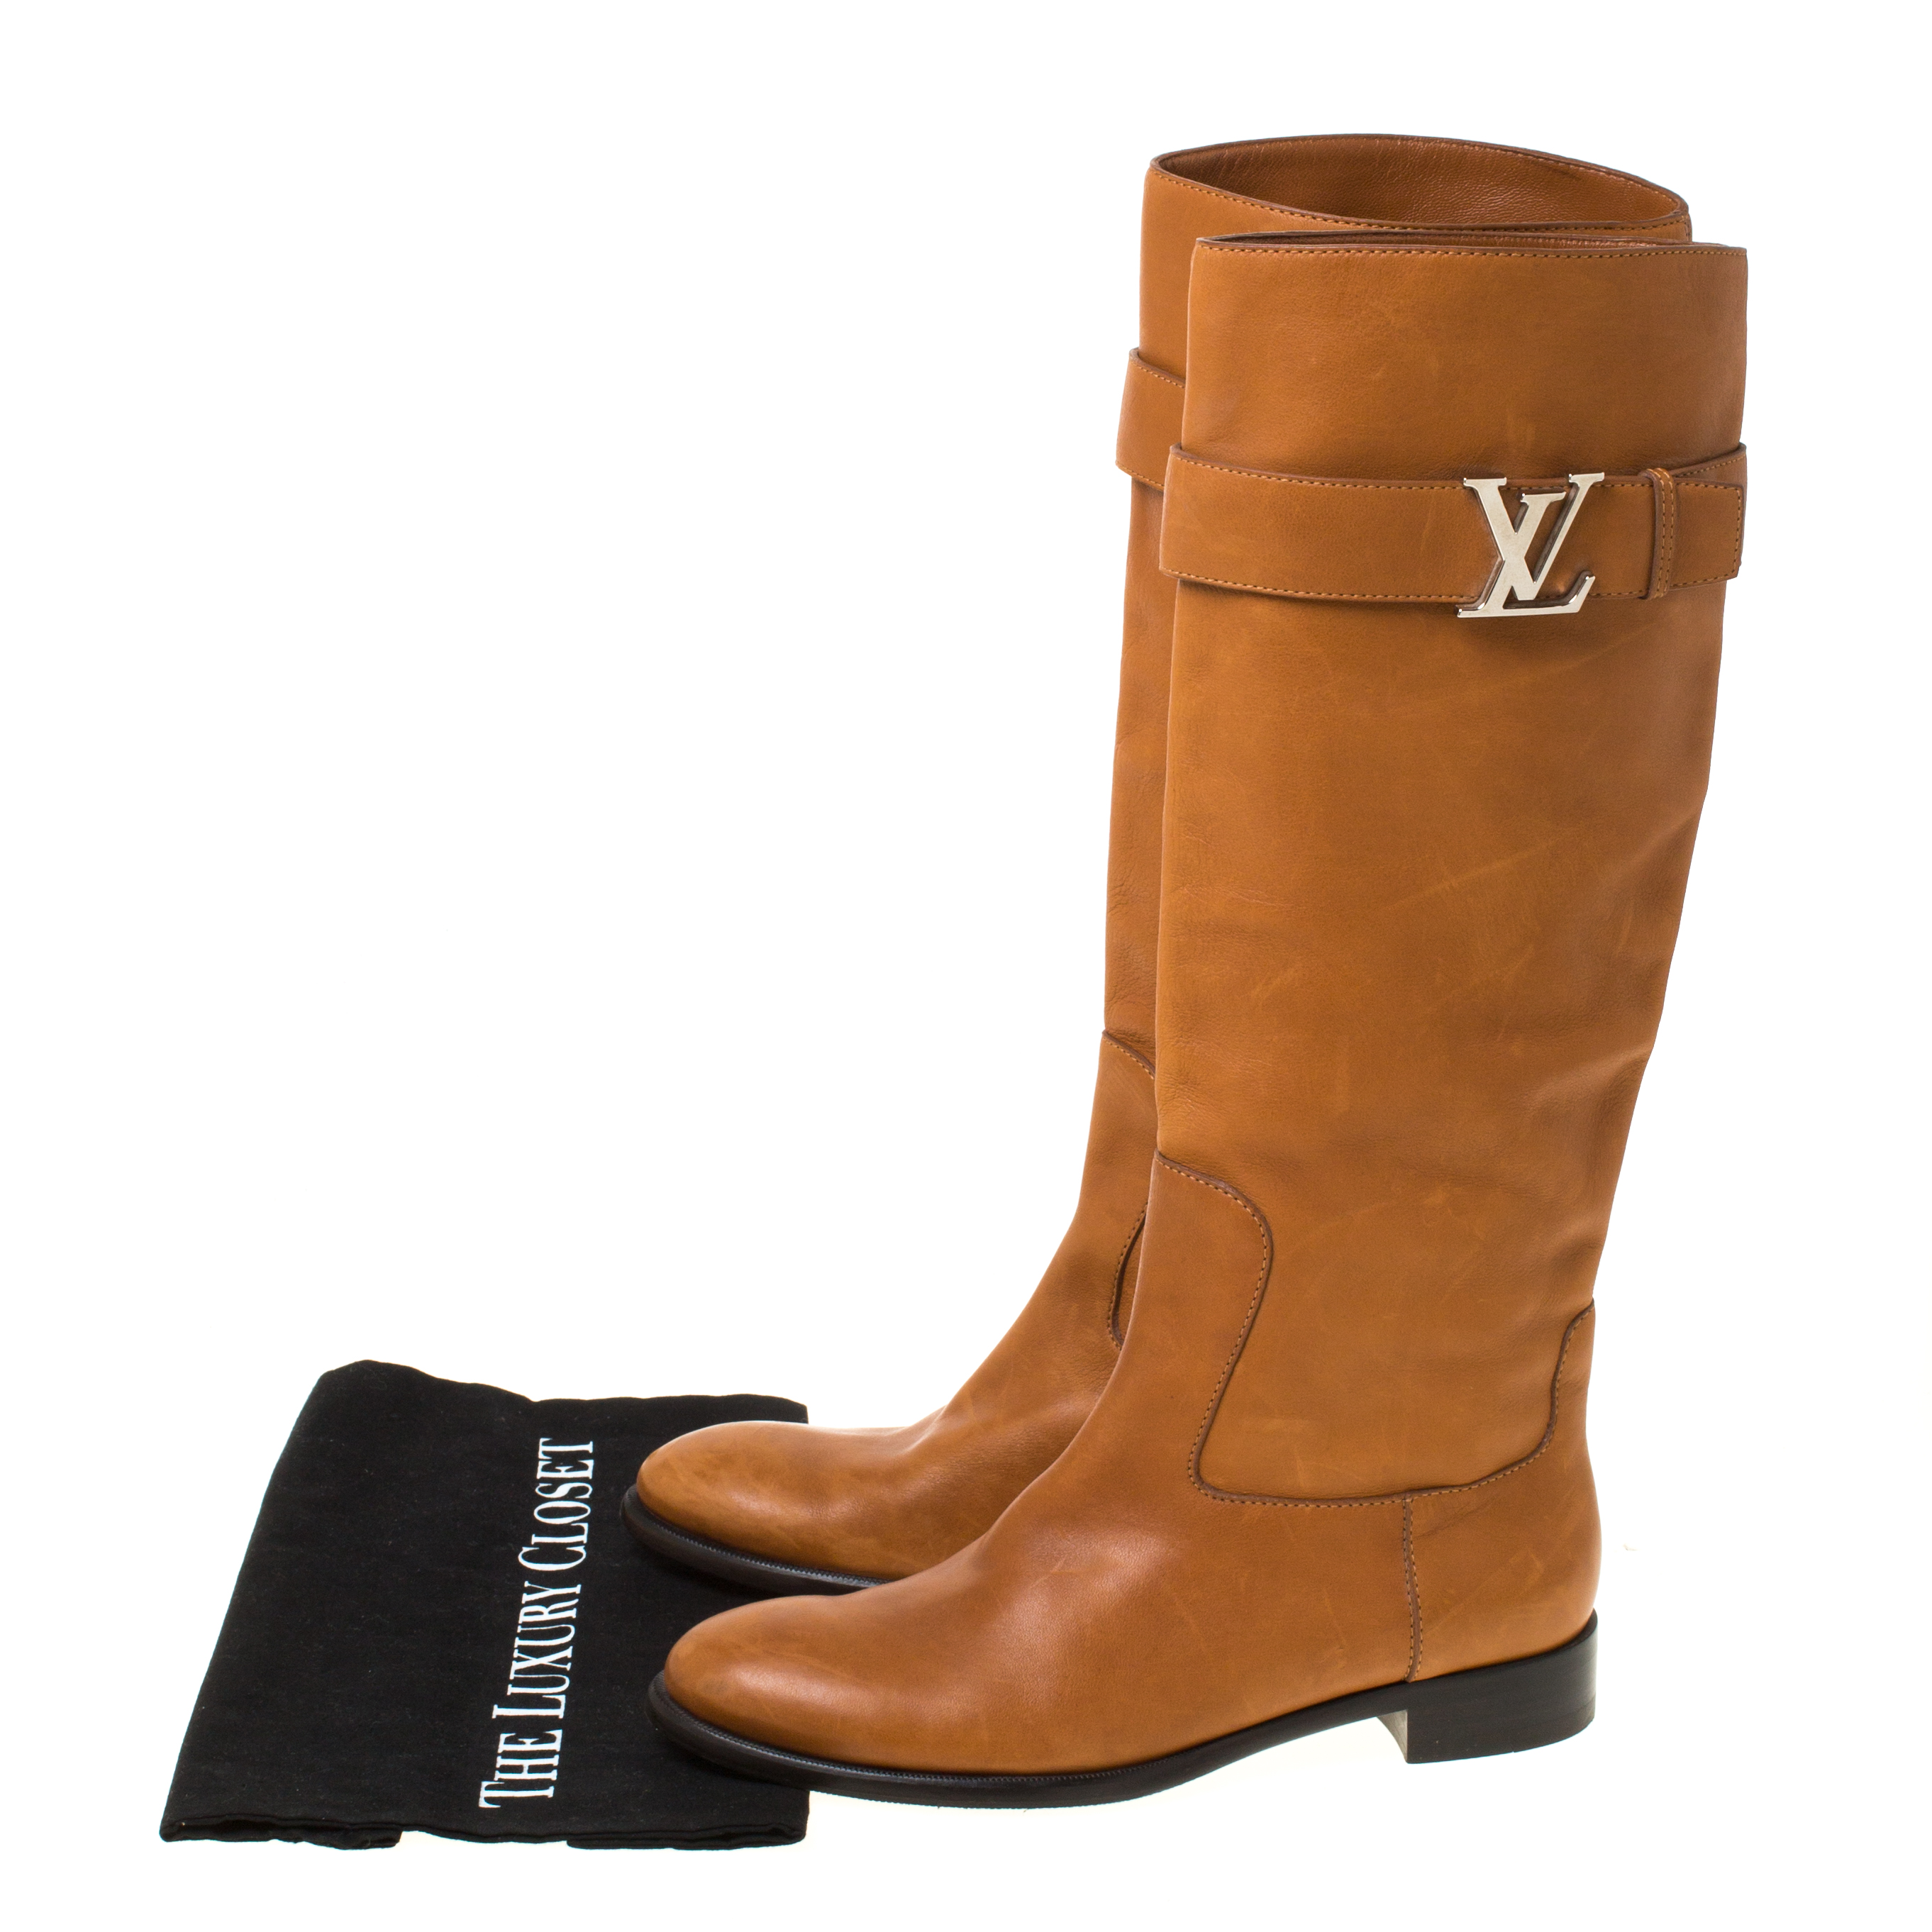 Must have Louis Vuitton Boots. Size 39. Box and certificates included.